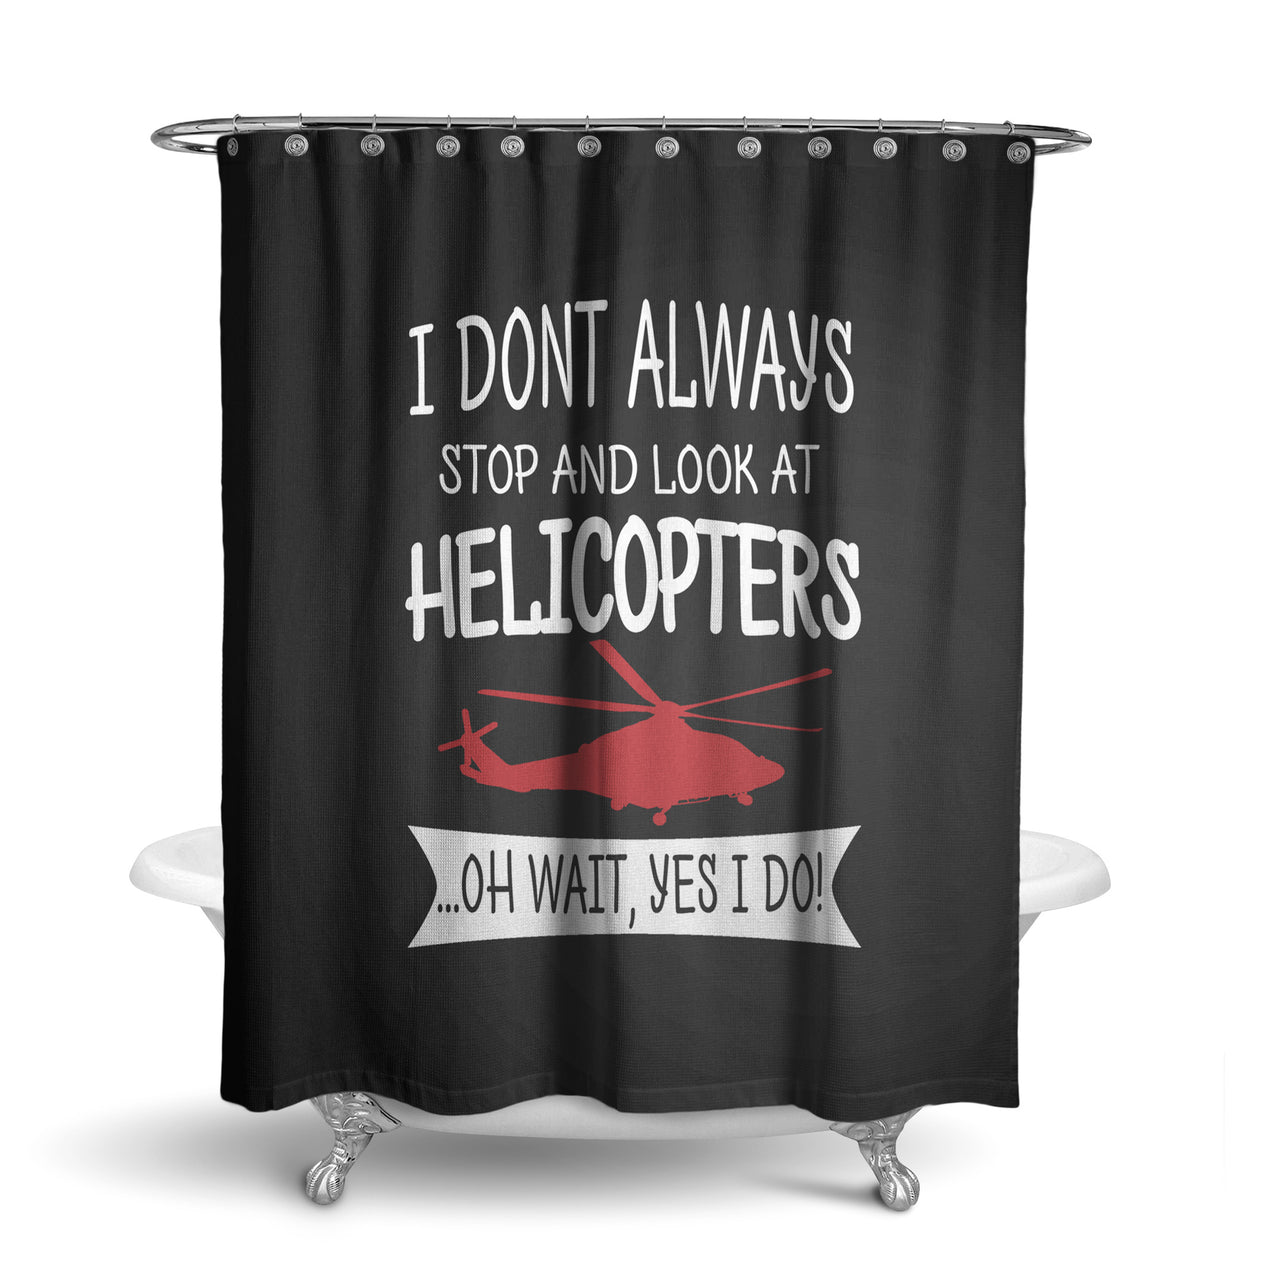 I Don't Always Stop and Look at Helicopters Designed Shower Curtains